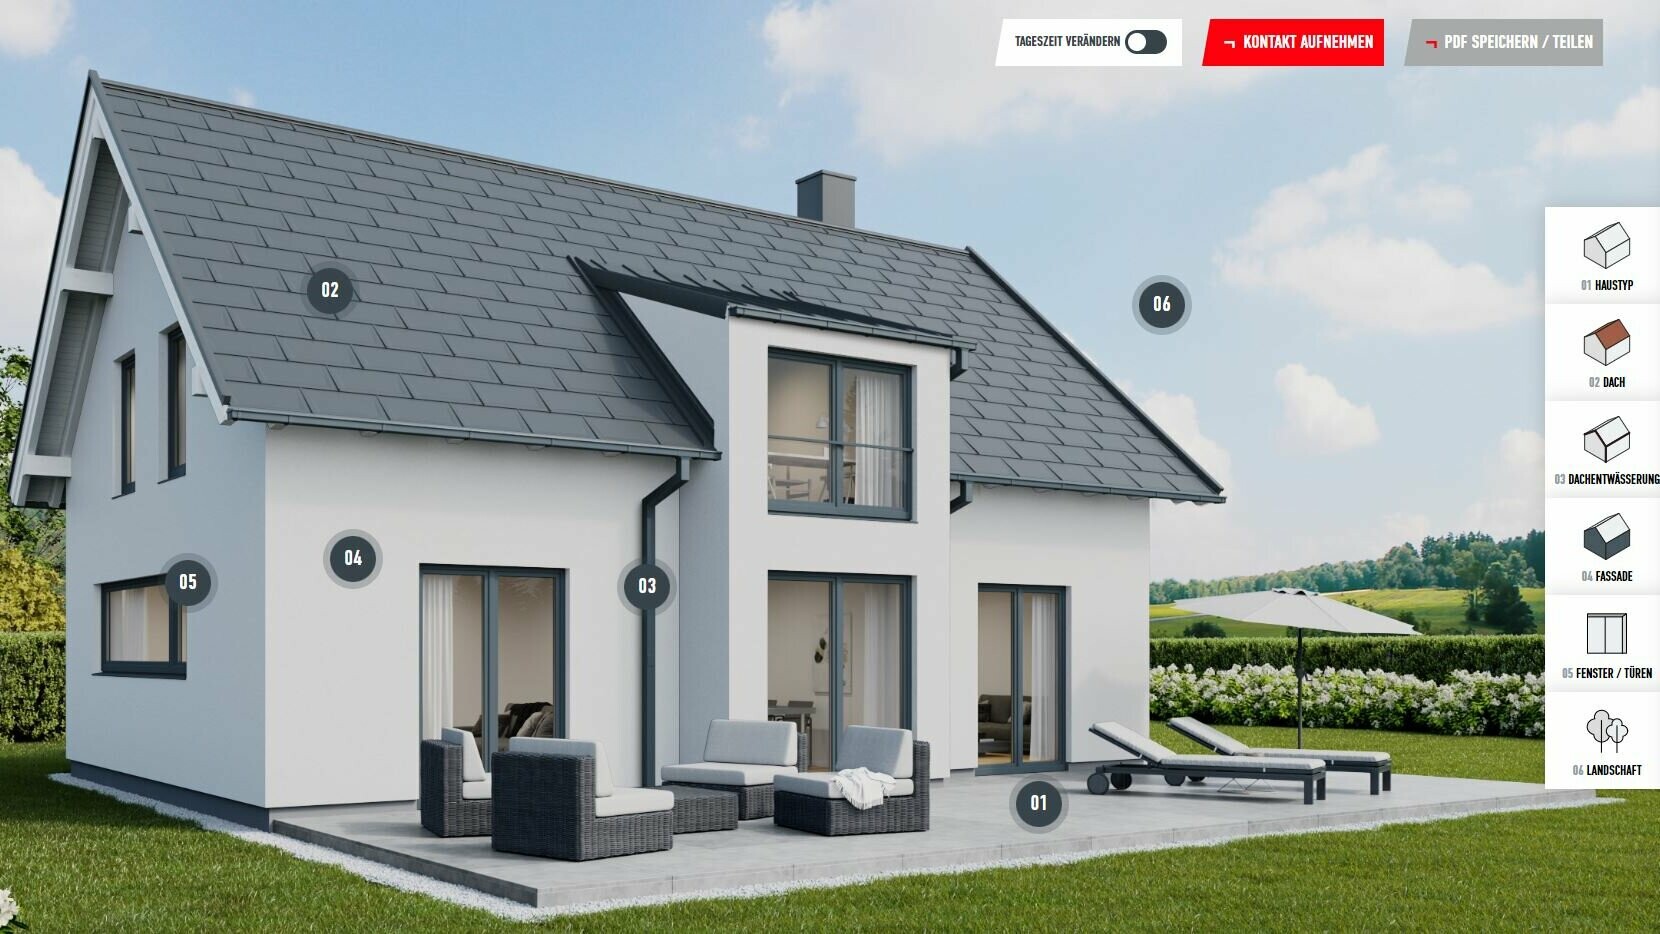 Example of a configuration view of the detached house with gable roof consisting of PREFA roof tiles R.16 in P.10 dark grey in a rural area.